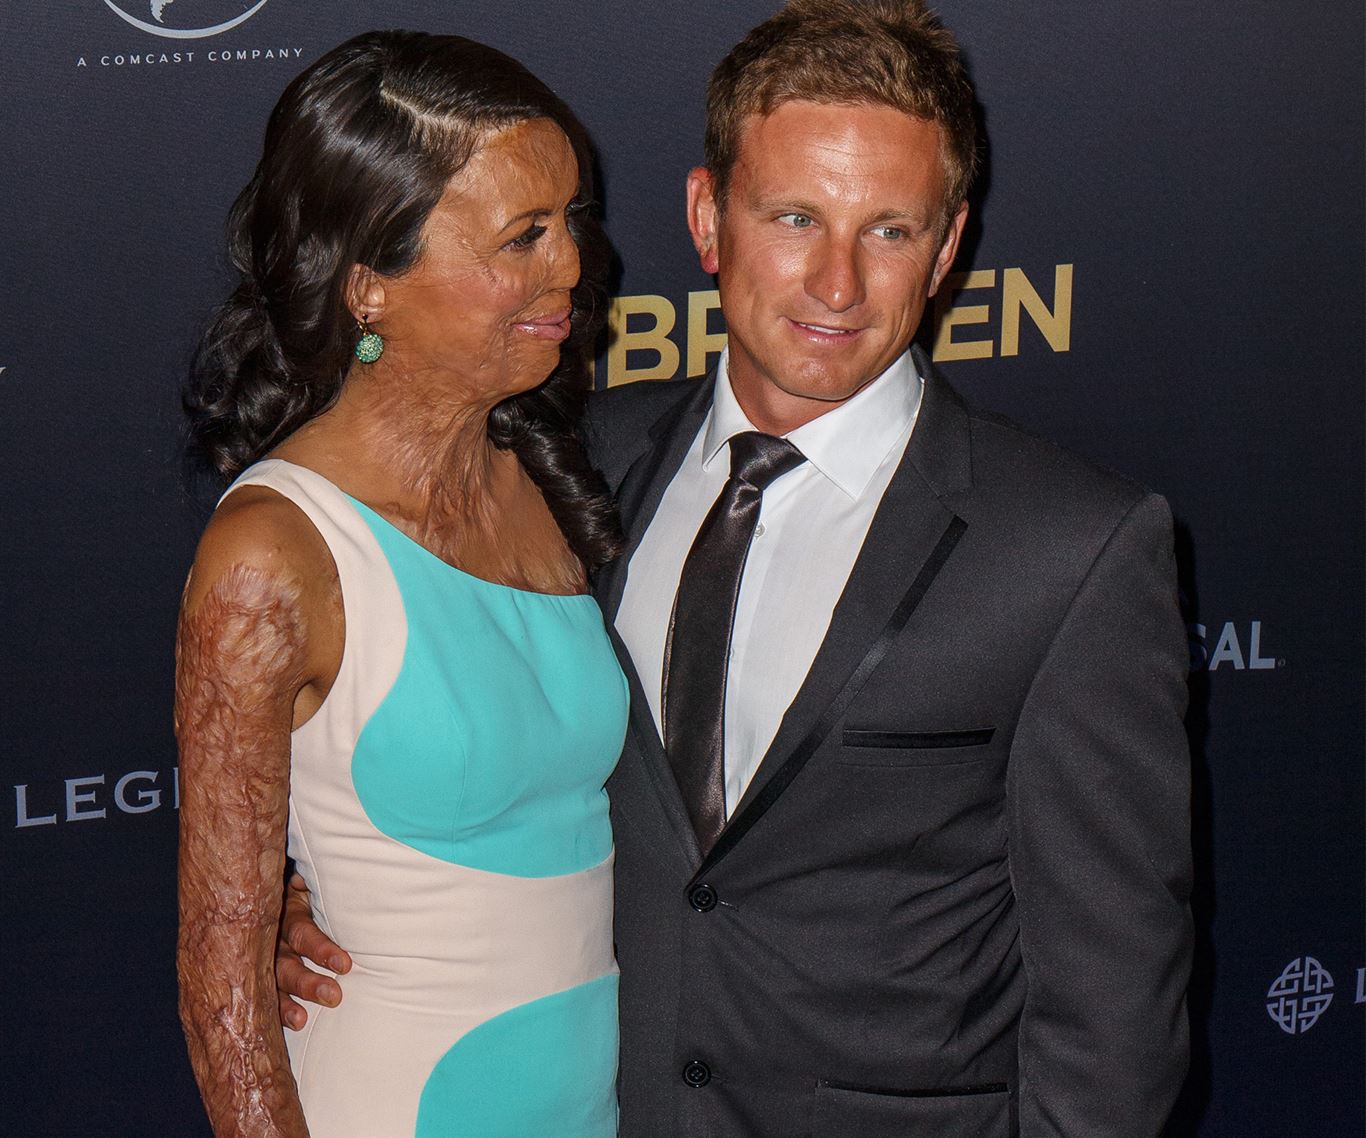 In pictures: Turia Pitt and Michael Hoskin's love story:But Michael gave up his job as a cop to care for the love of his life. Turia describes Michael and her mum, Celestine, 45, as her rocks. “You are looking beautiful today Turia. What are you going to achieve today?’’ She recalled Michael saying to her, when she was in the hospital.